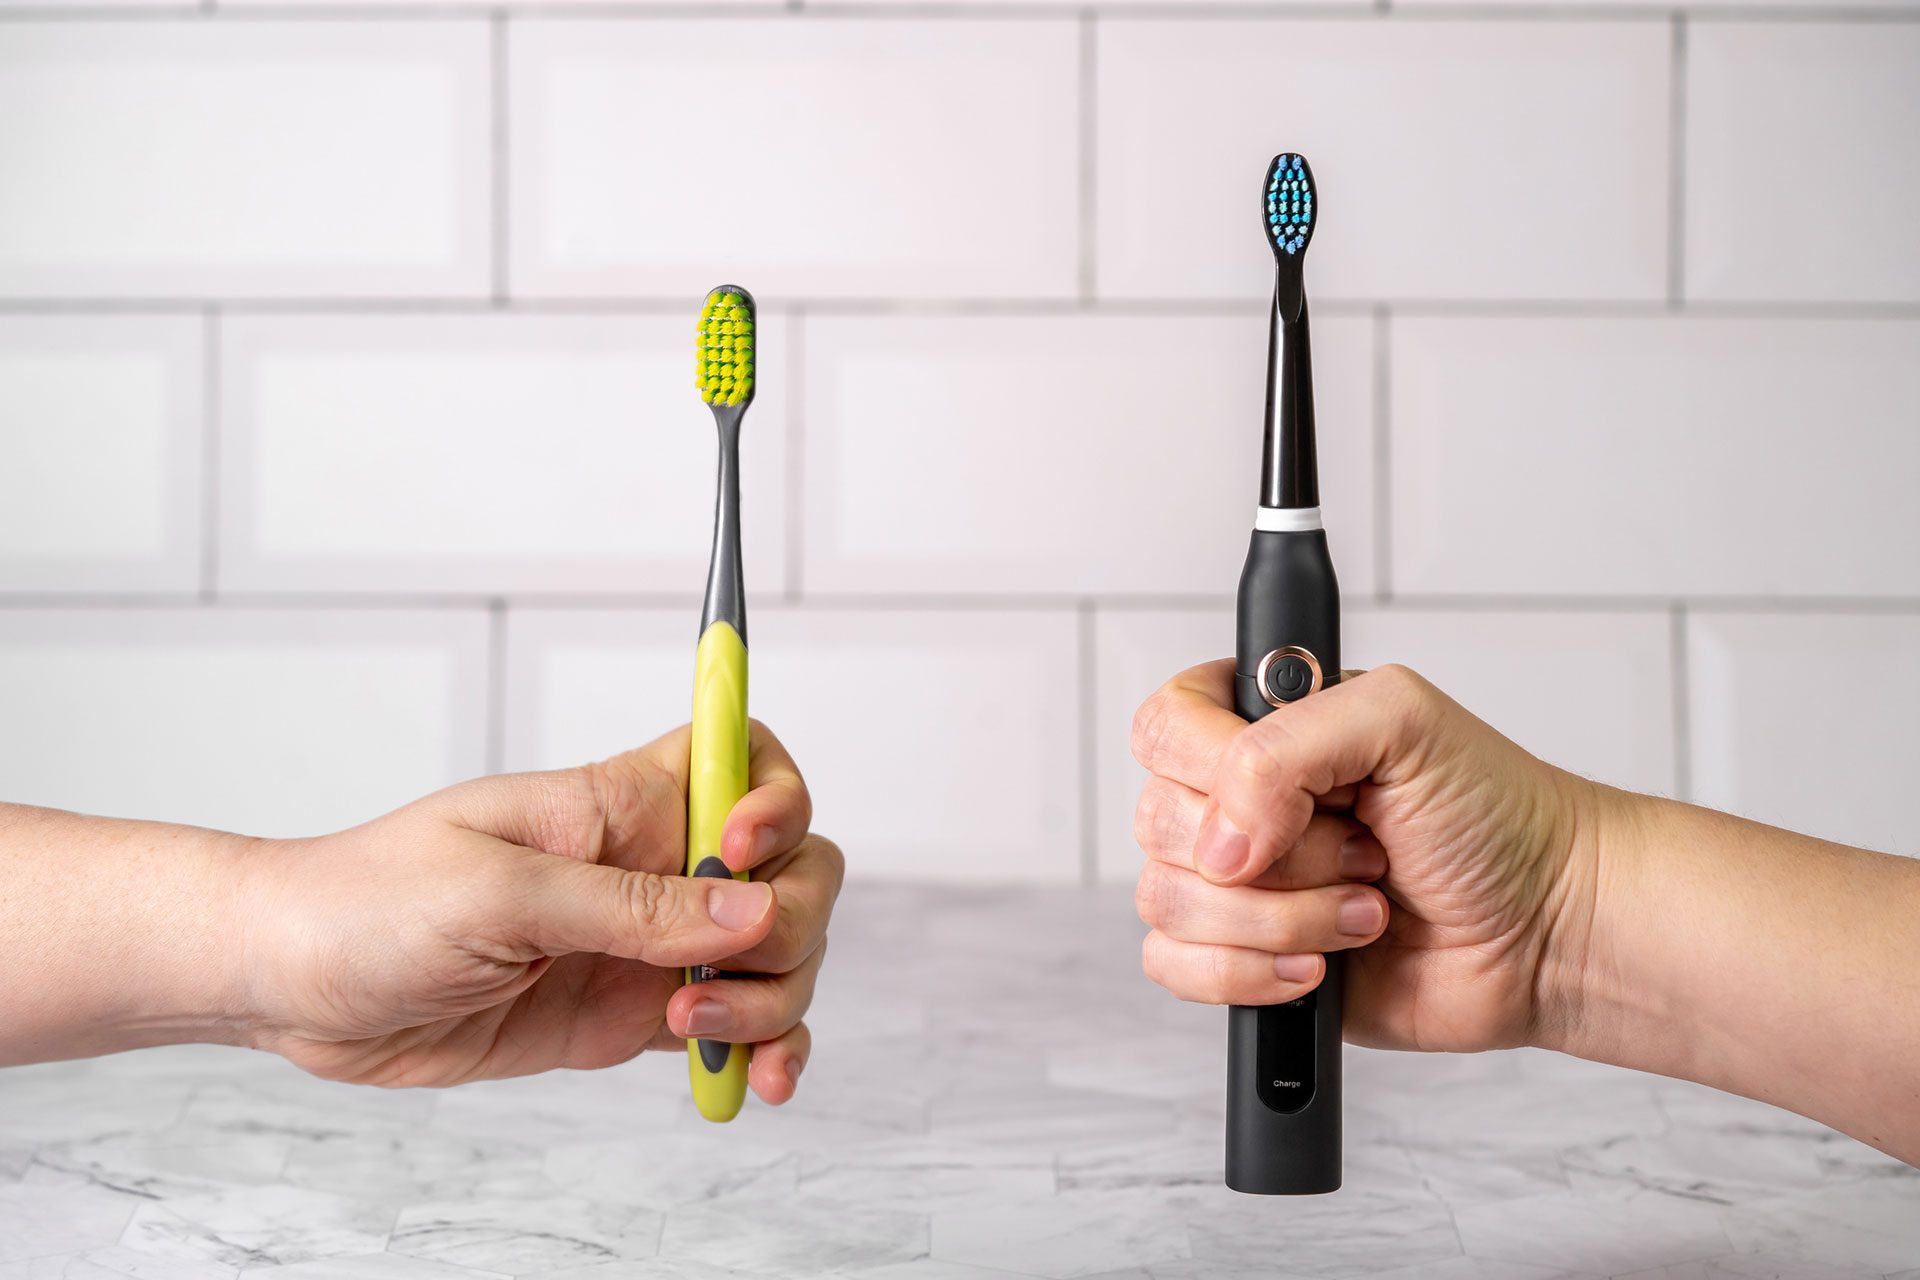 Choosing the Right Toothbrush for Optimal Oral Health